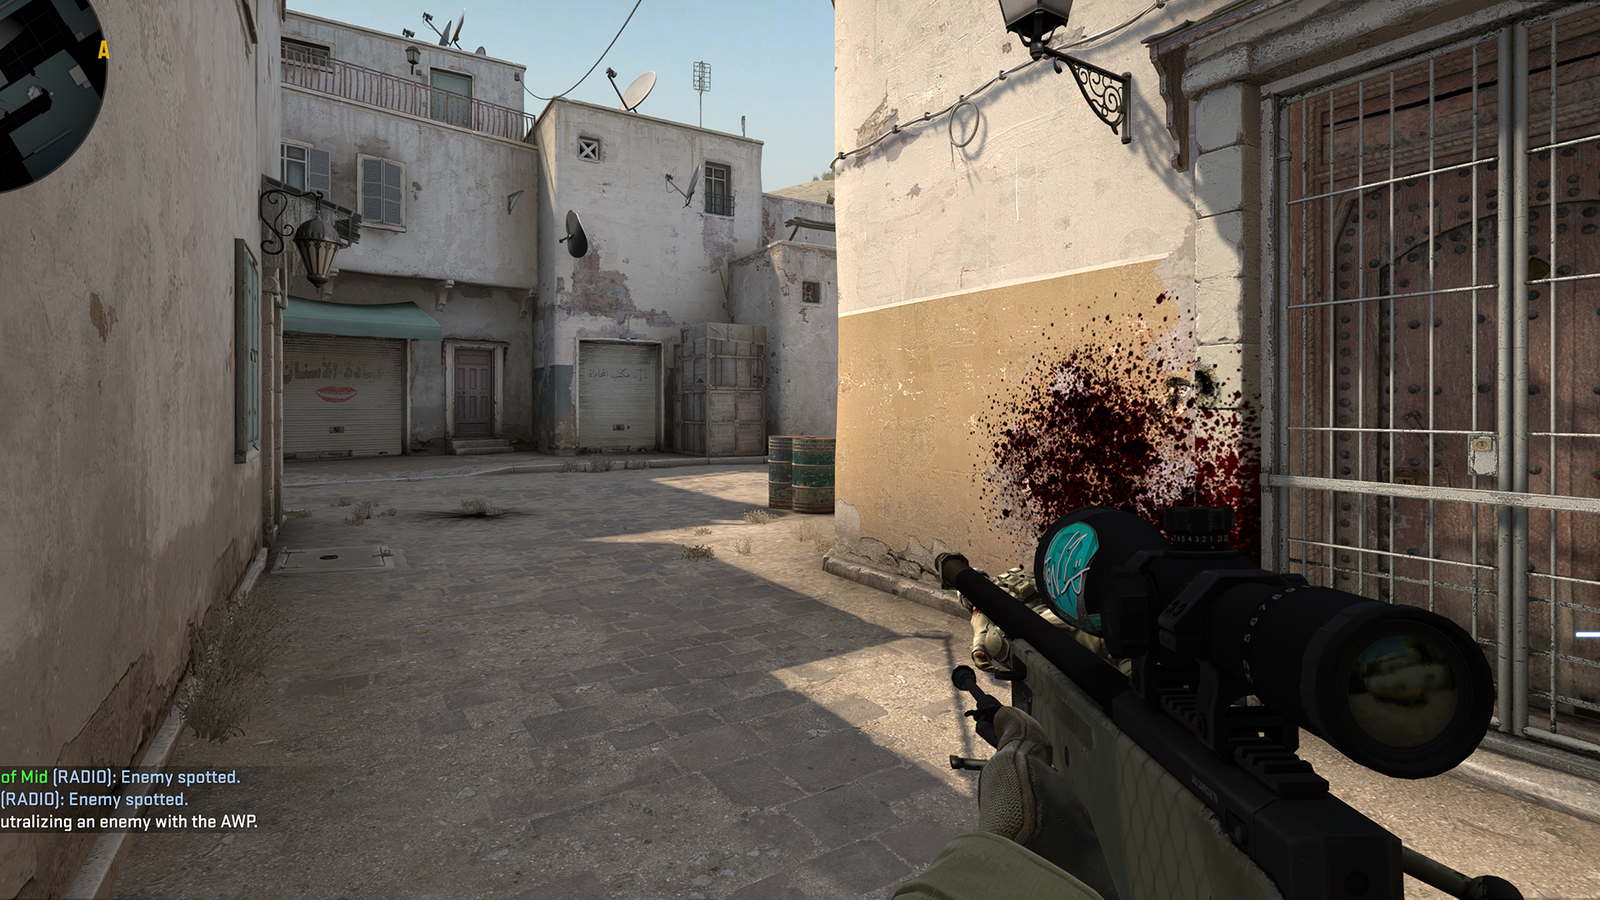 A screenshot of an AWP sniper rifle being used in a game of CS:GO